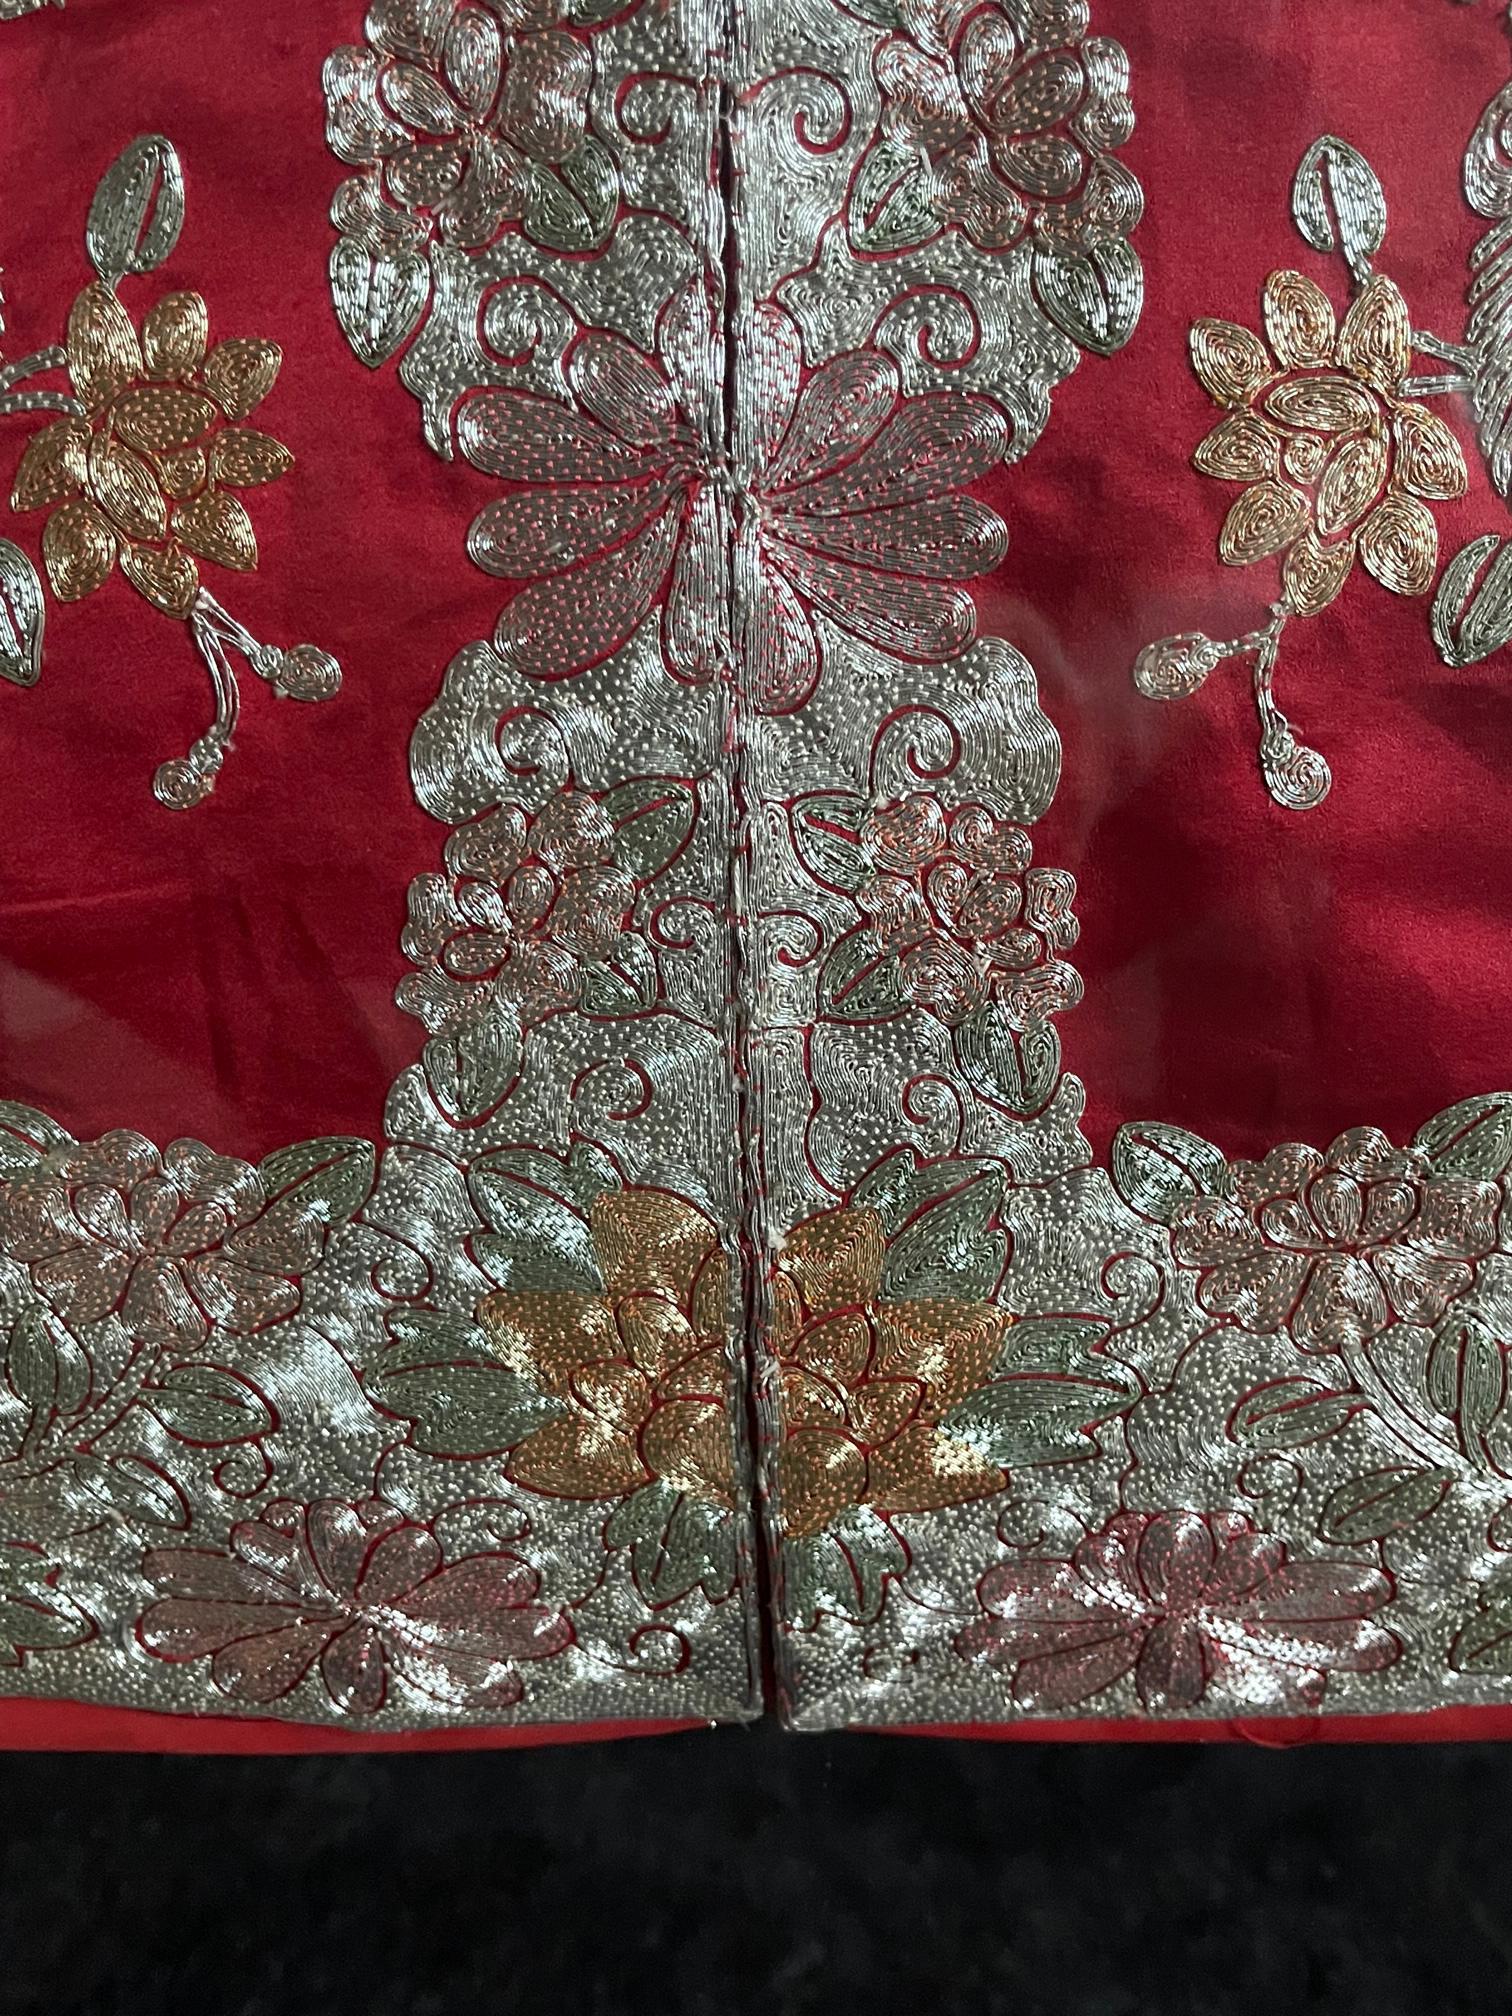 Embroidered Framed Chinese Embroidery Southern Bridal Jacket For Sale